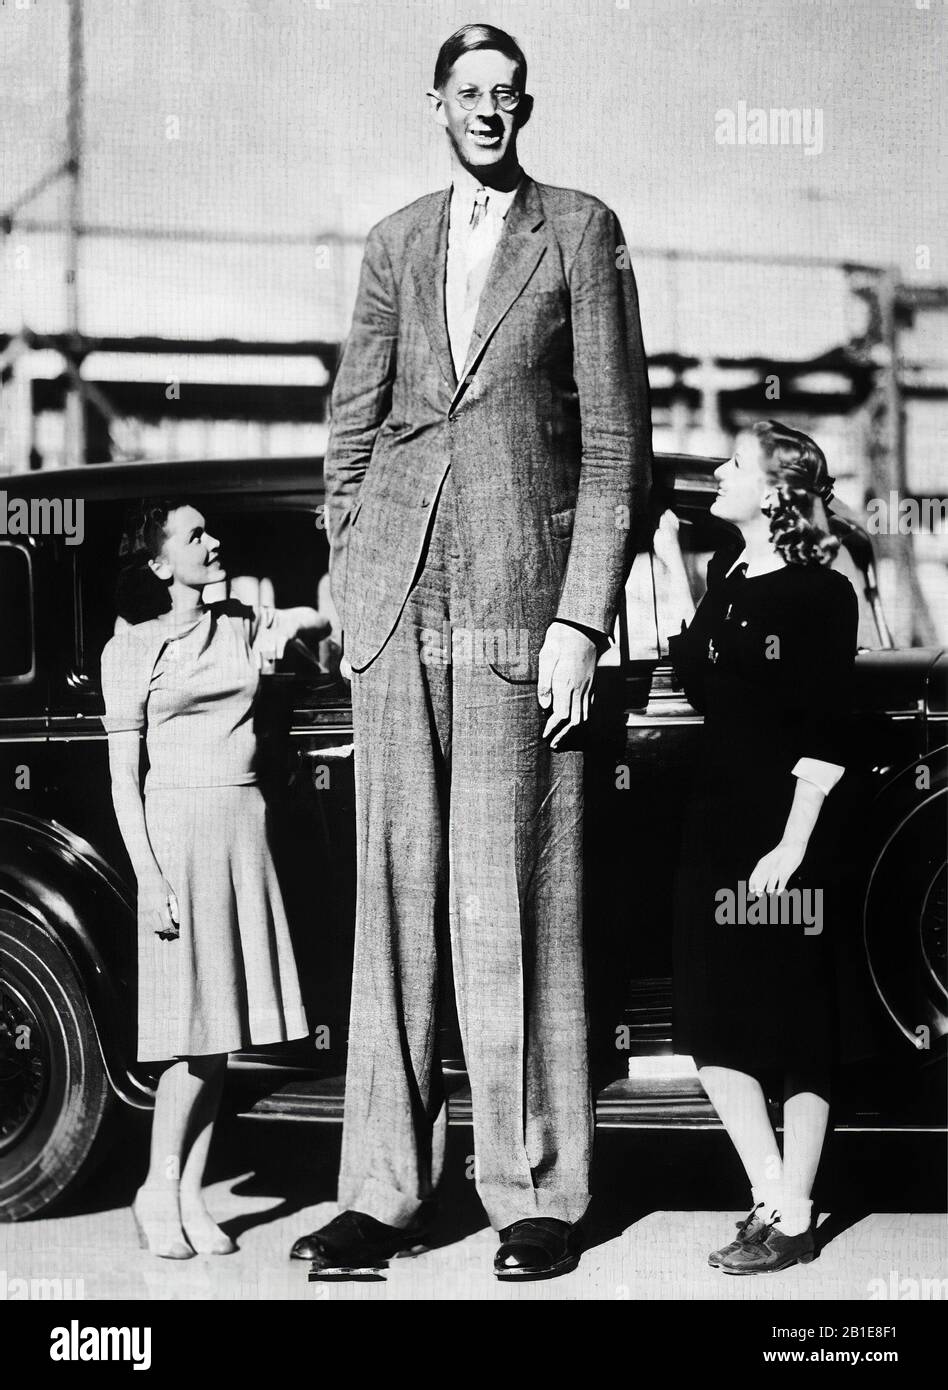 Robert Wadlow, 'The Giant of Illinois.' Having reached a height of 8 ft 11 in, Wadlow is the tallest confirmed person to have ever lived Stock Photo